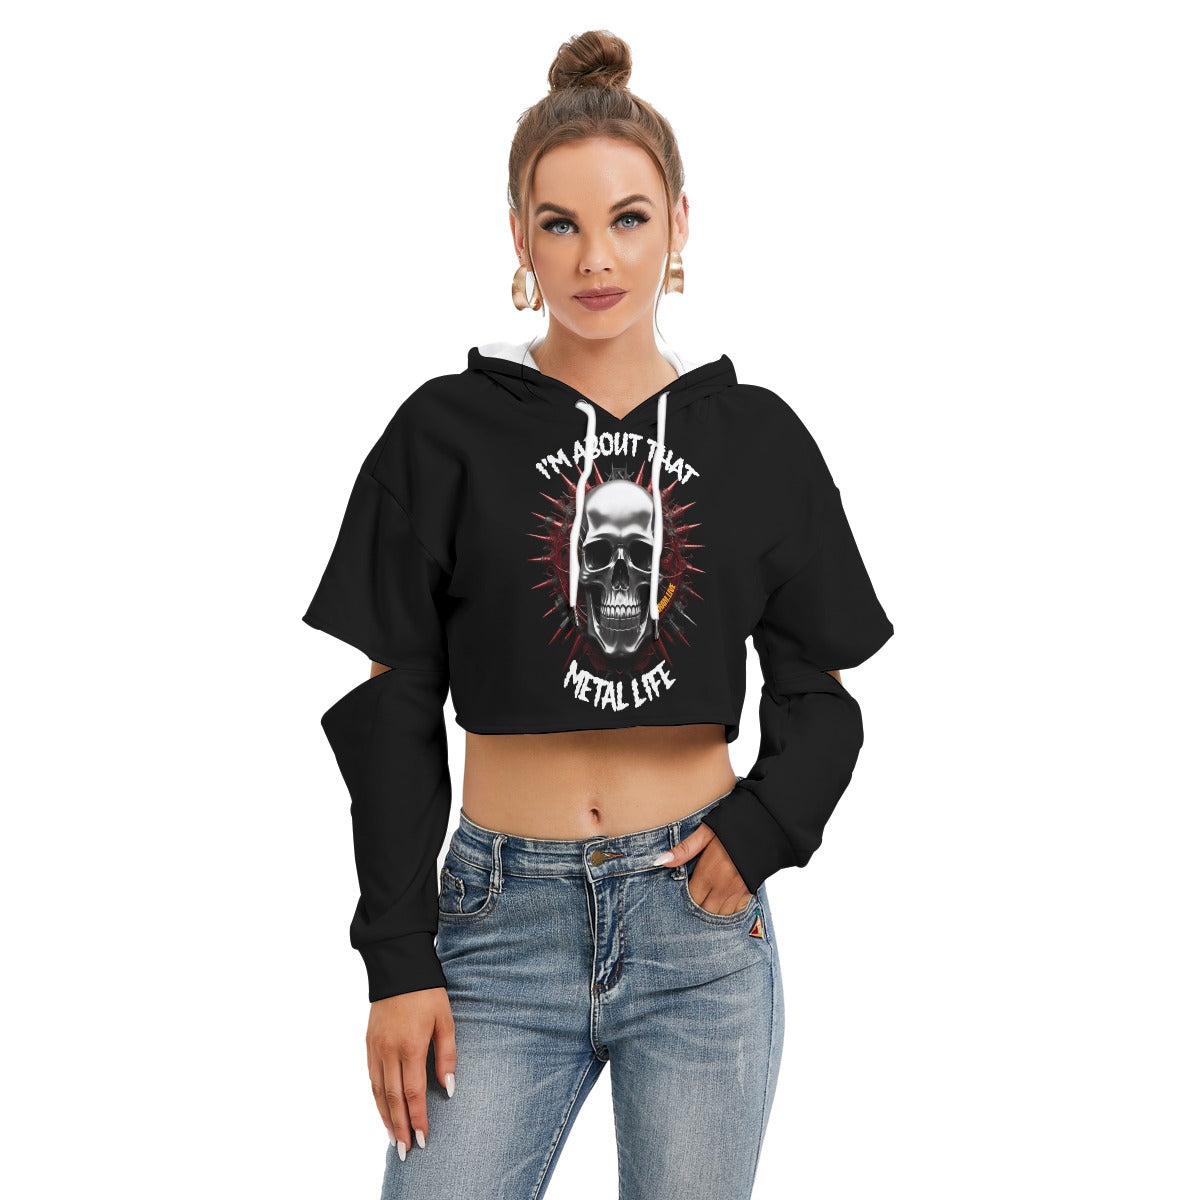 K-RAM About That Life Women's Heavy Fleece Hoodie With Hollow Out Sleeve